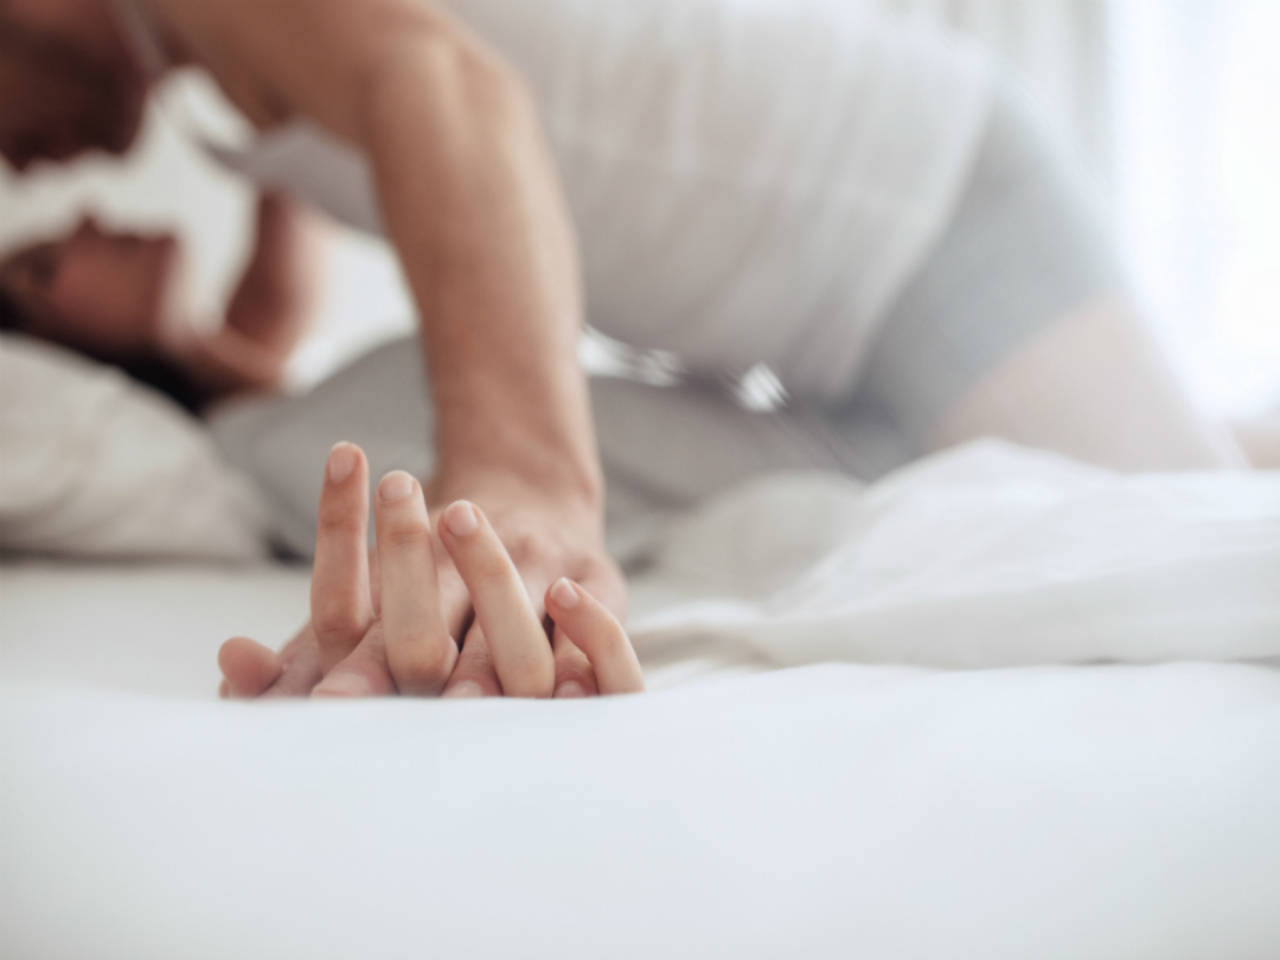 5 sex positions to try if you are bored with the regular ones